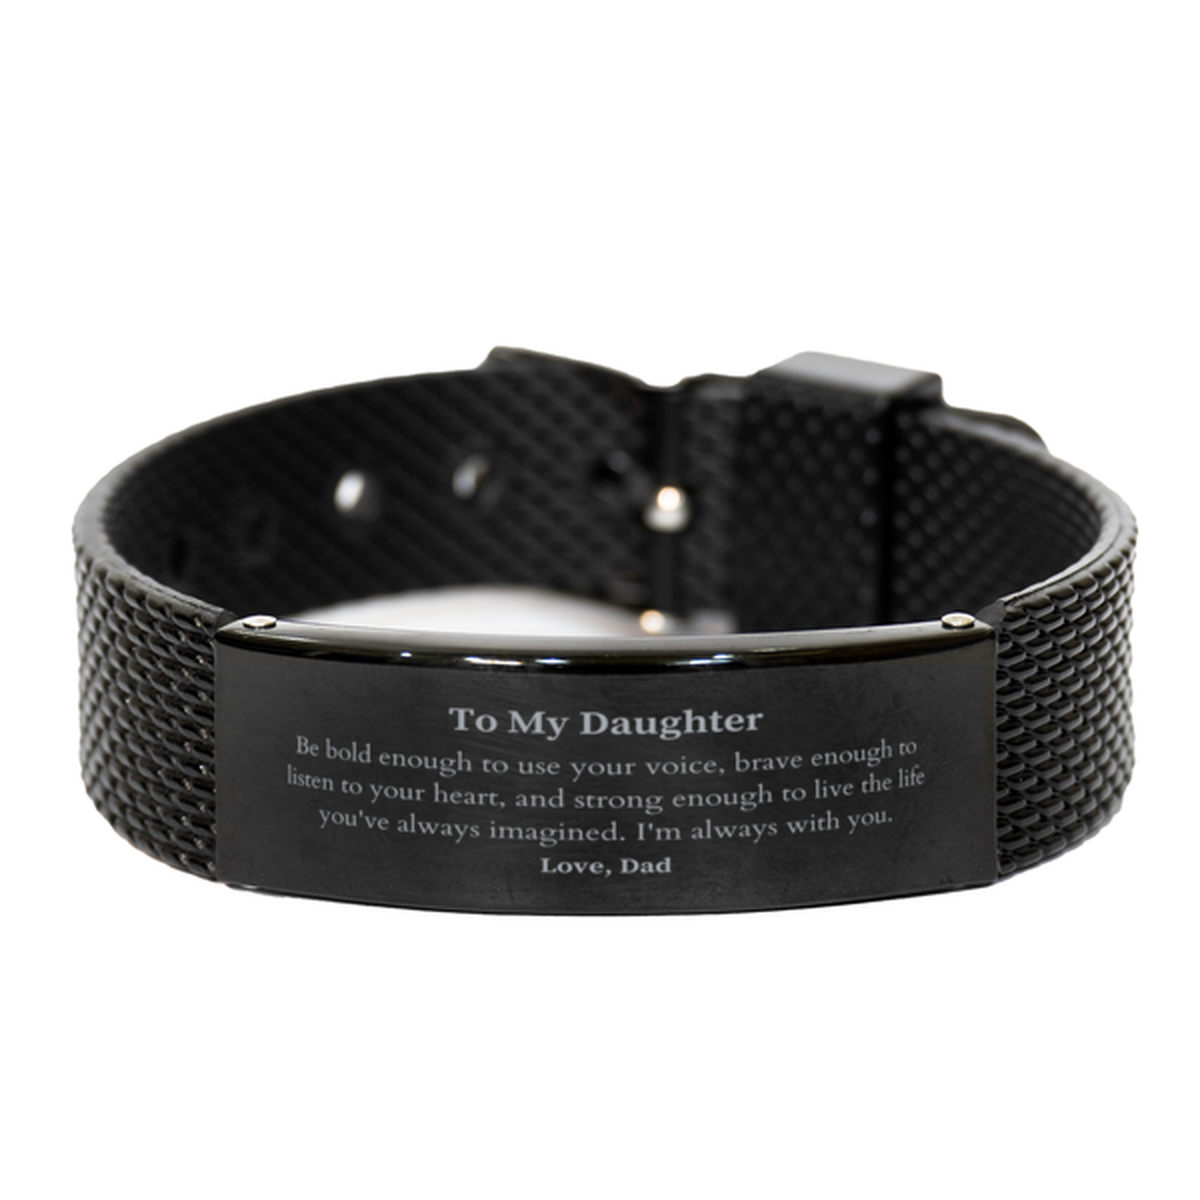 Keepsake Daughter Black Shark Mesh Bracelet Gift Idea Graduation Christmas Birthday Daughter from Dad, Daughter Be bold enough to use your voice, brave enough to listen to your heart. Love, Dad